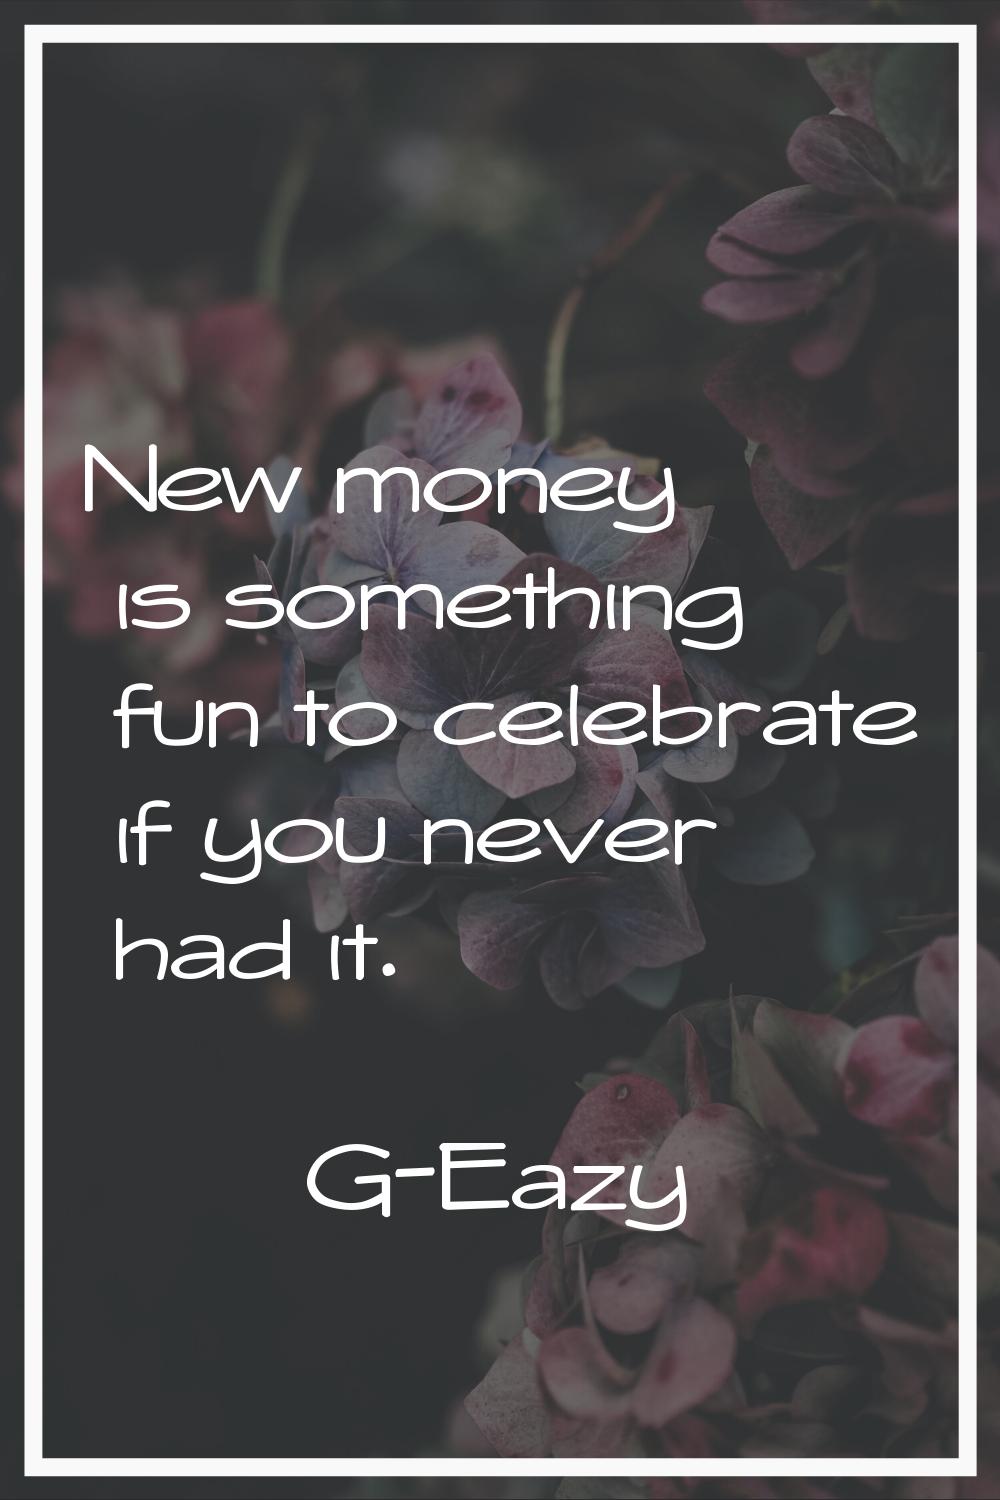 New money is something fun to celebrate if you never had it.